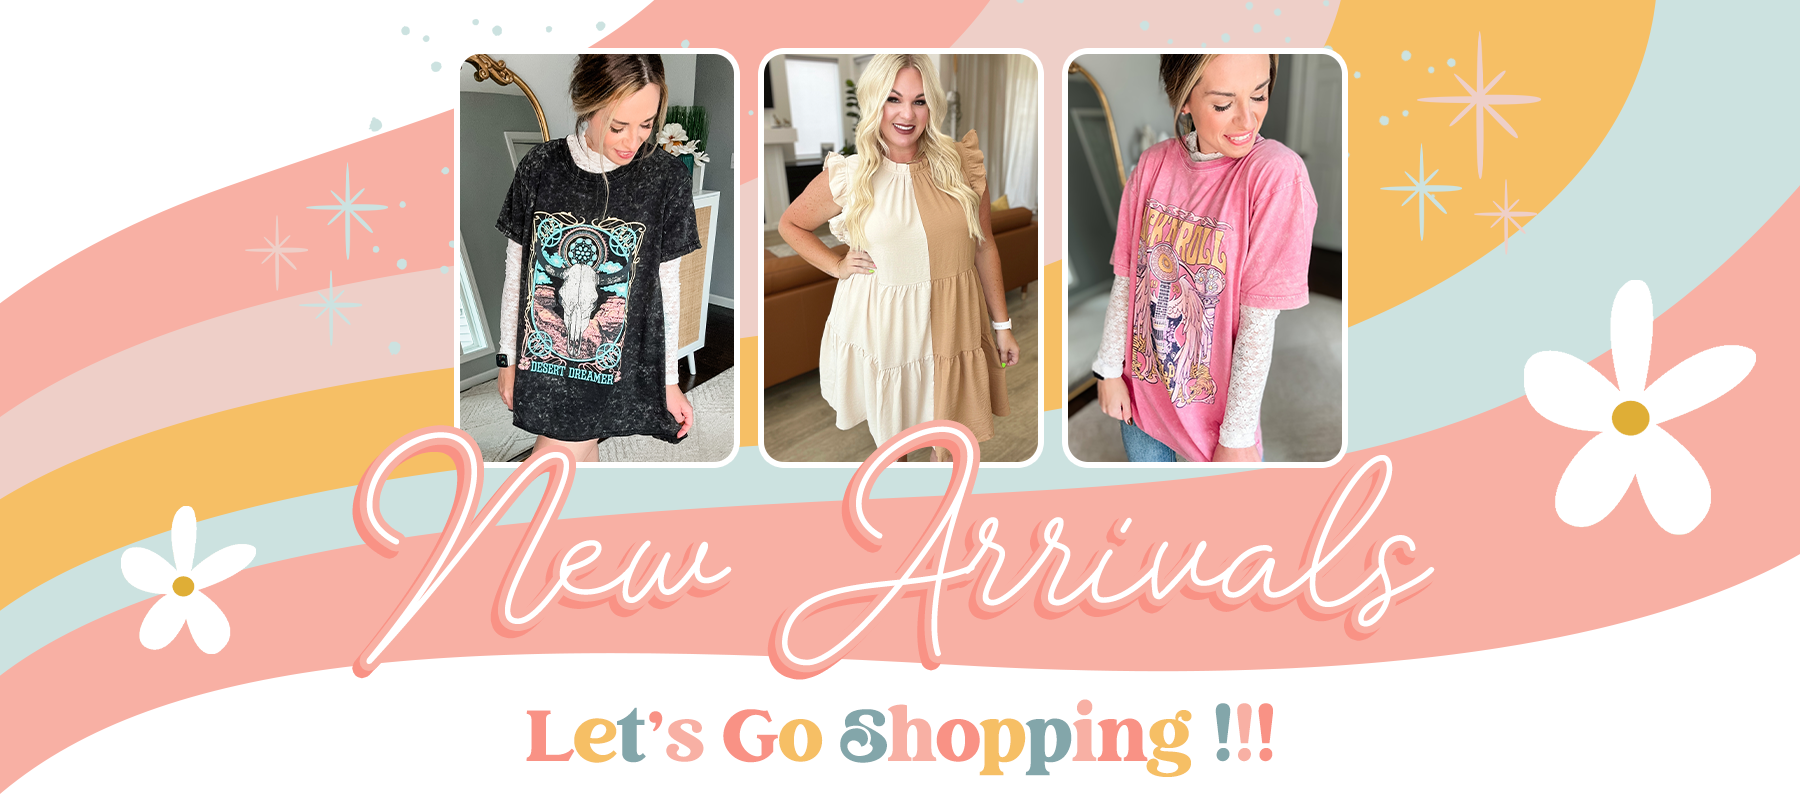 New Arrivals Let's Go Shopping!!!